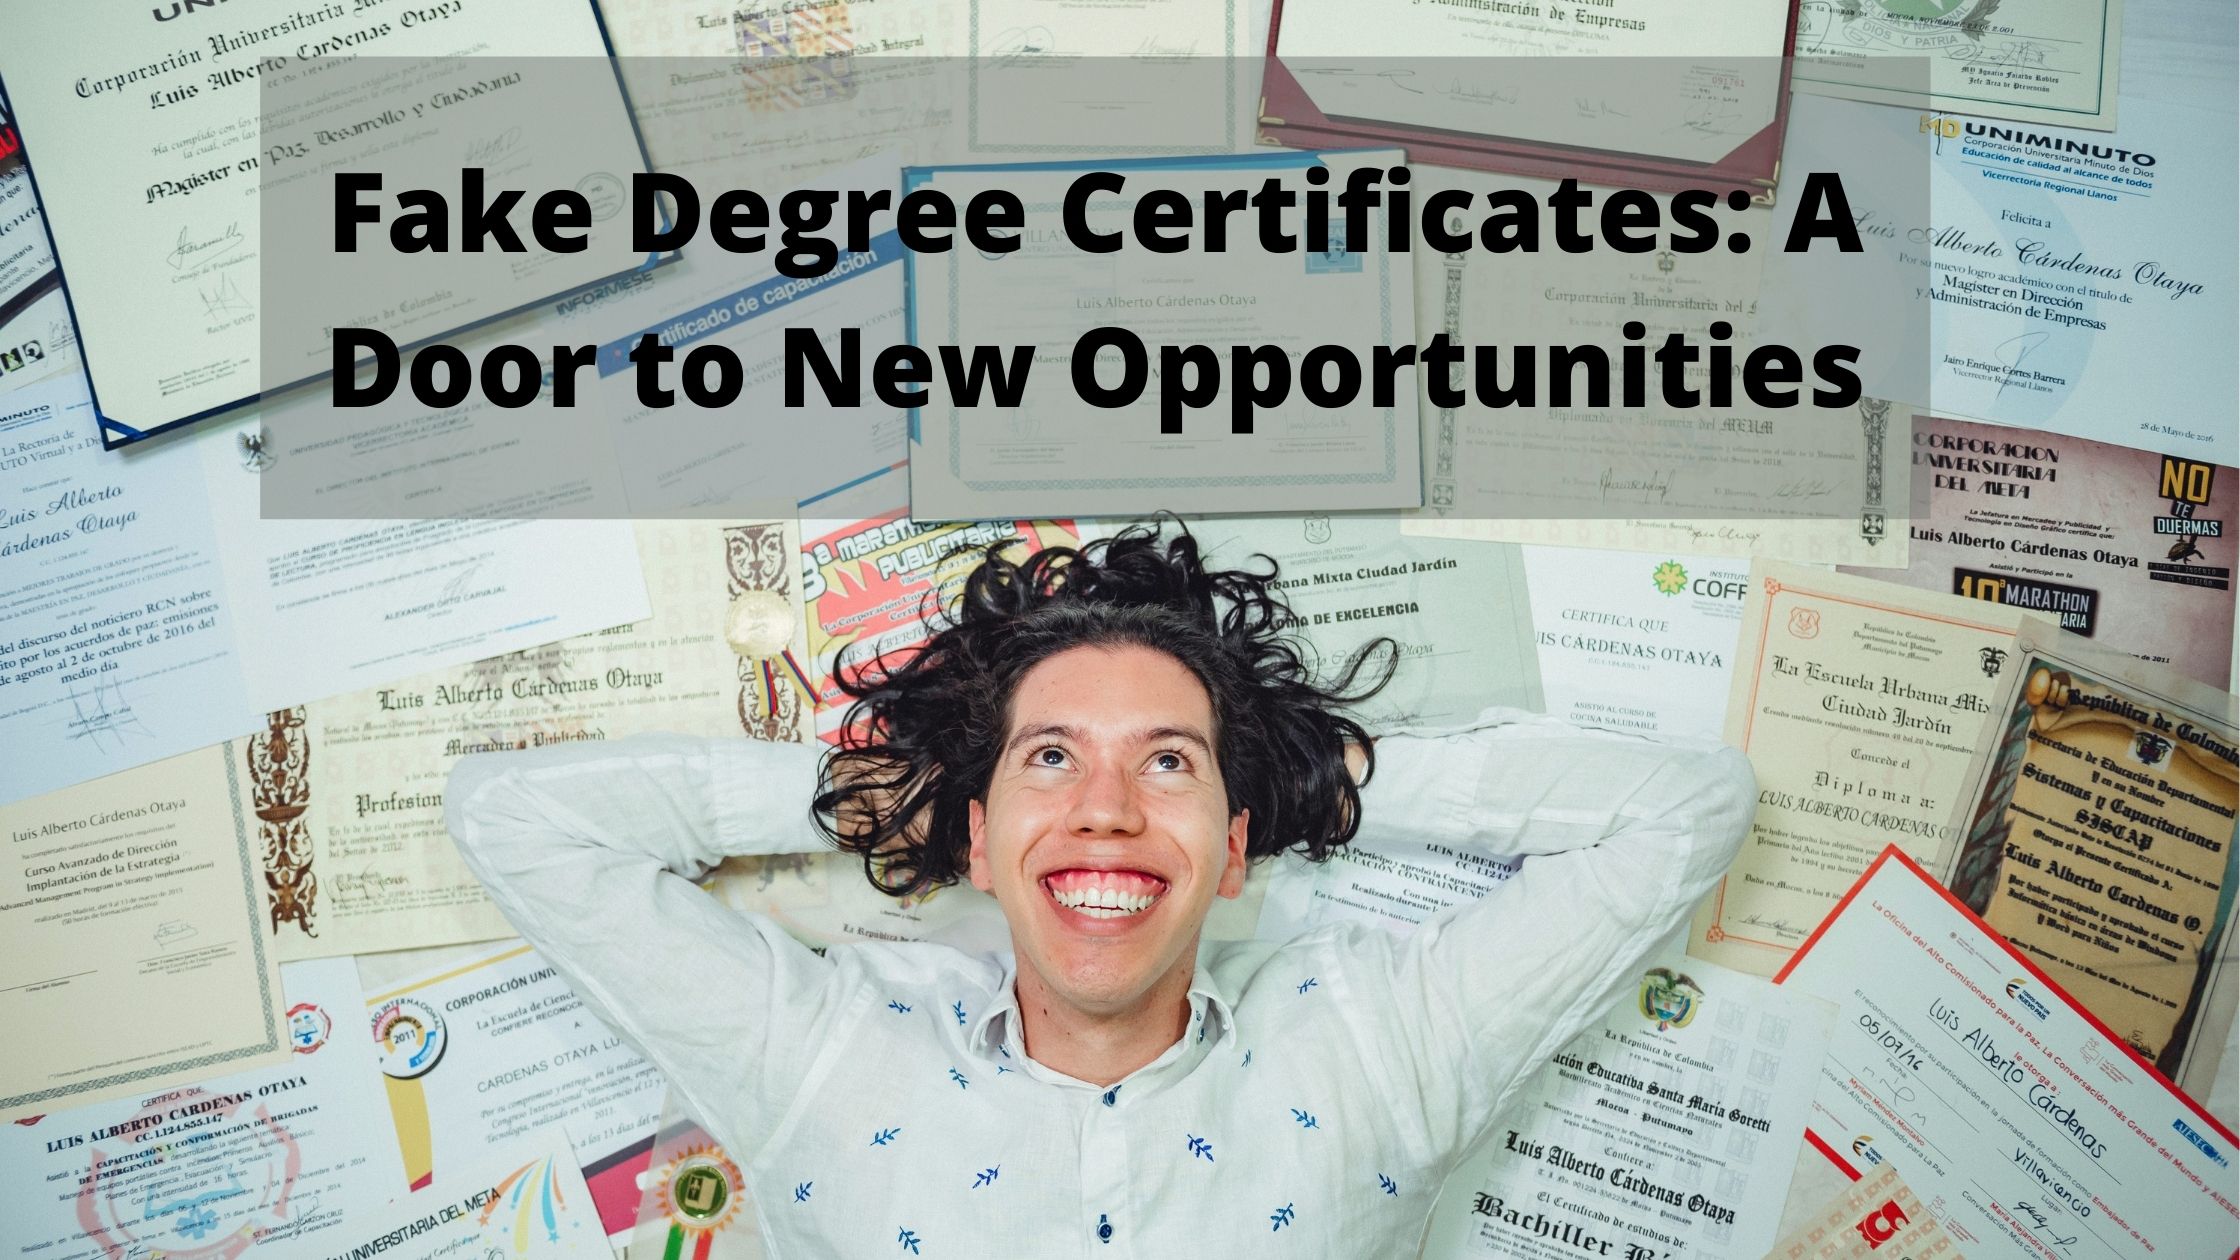 Fake Degree Certificates: A Door to New Opportunities